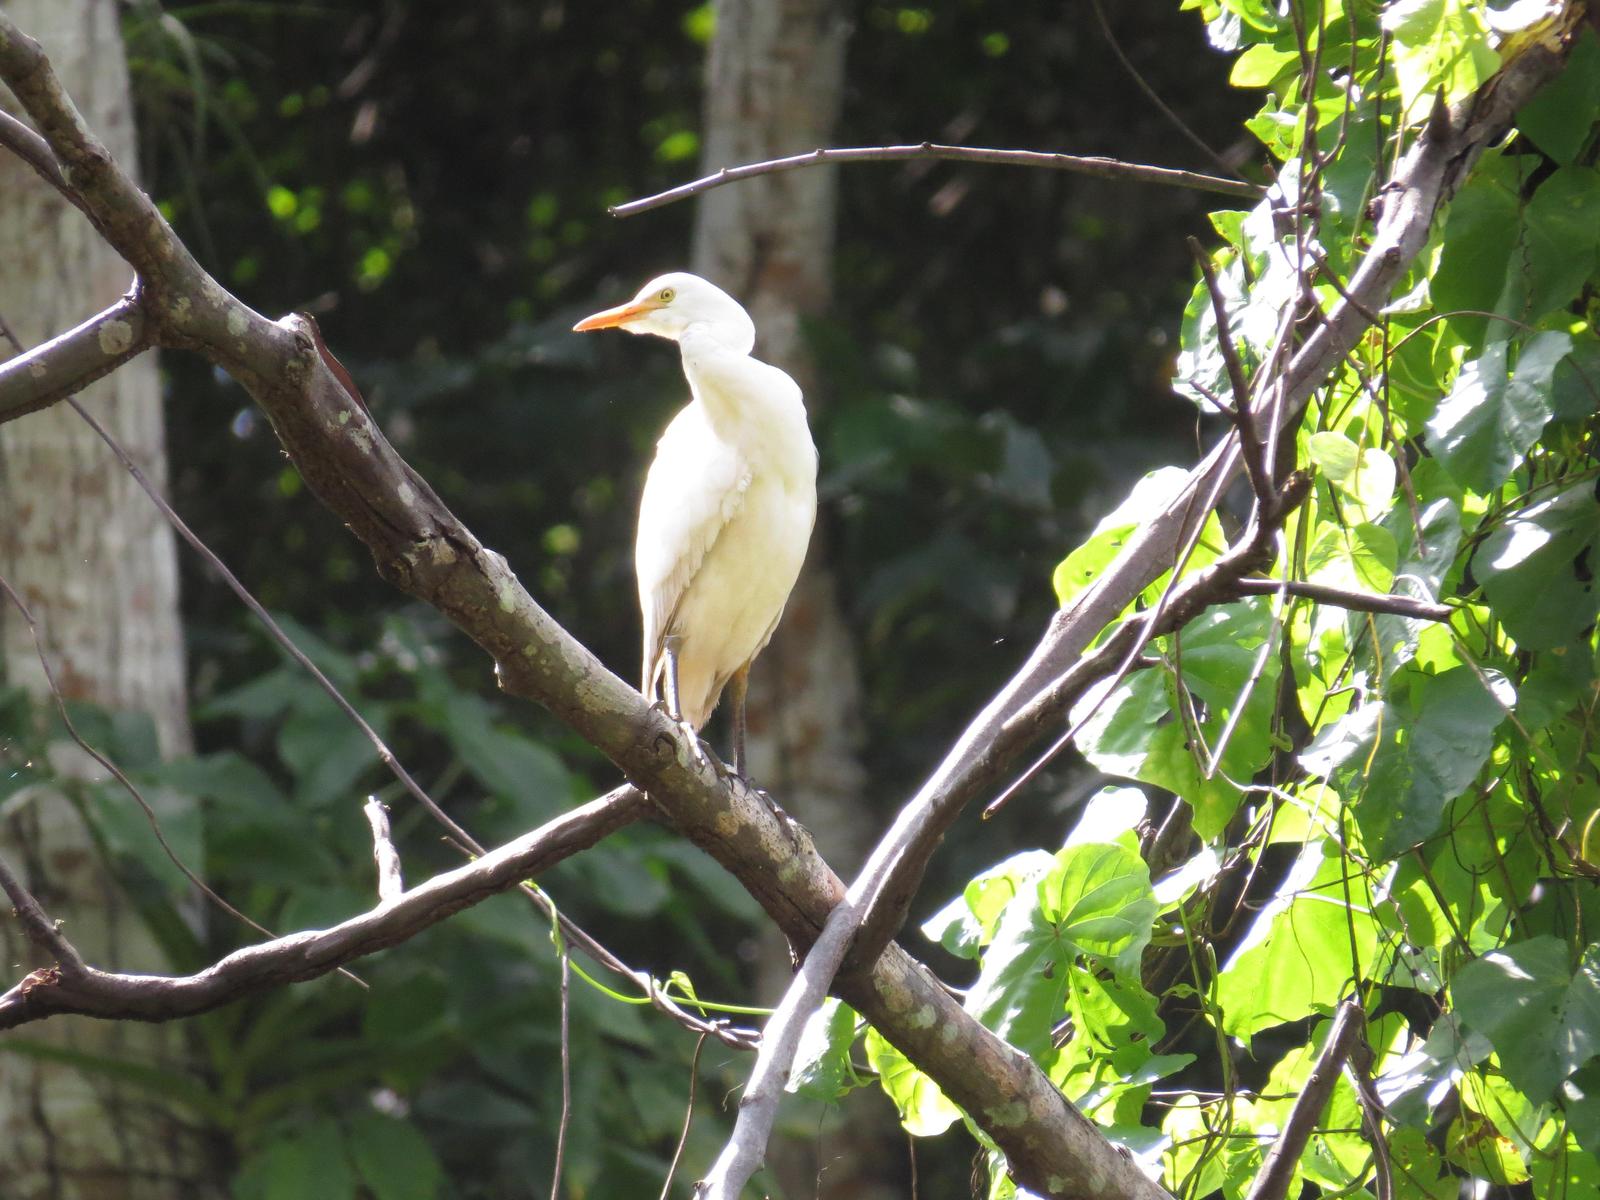 Cattle Egret Photo by Bonnie Clarfield-Bylin